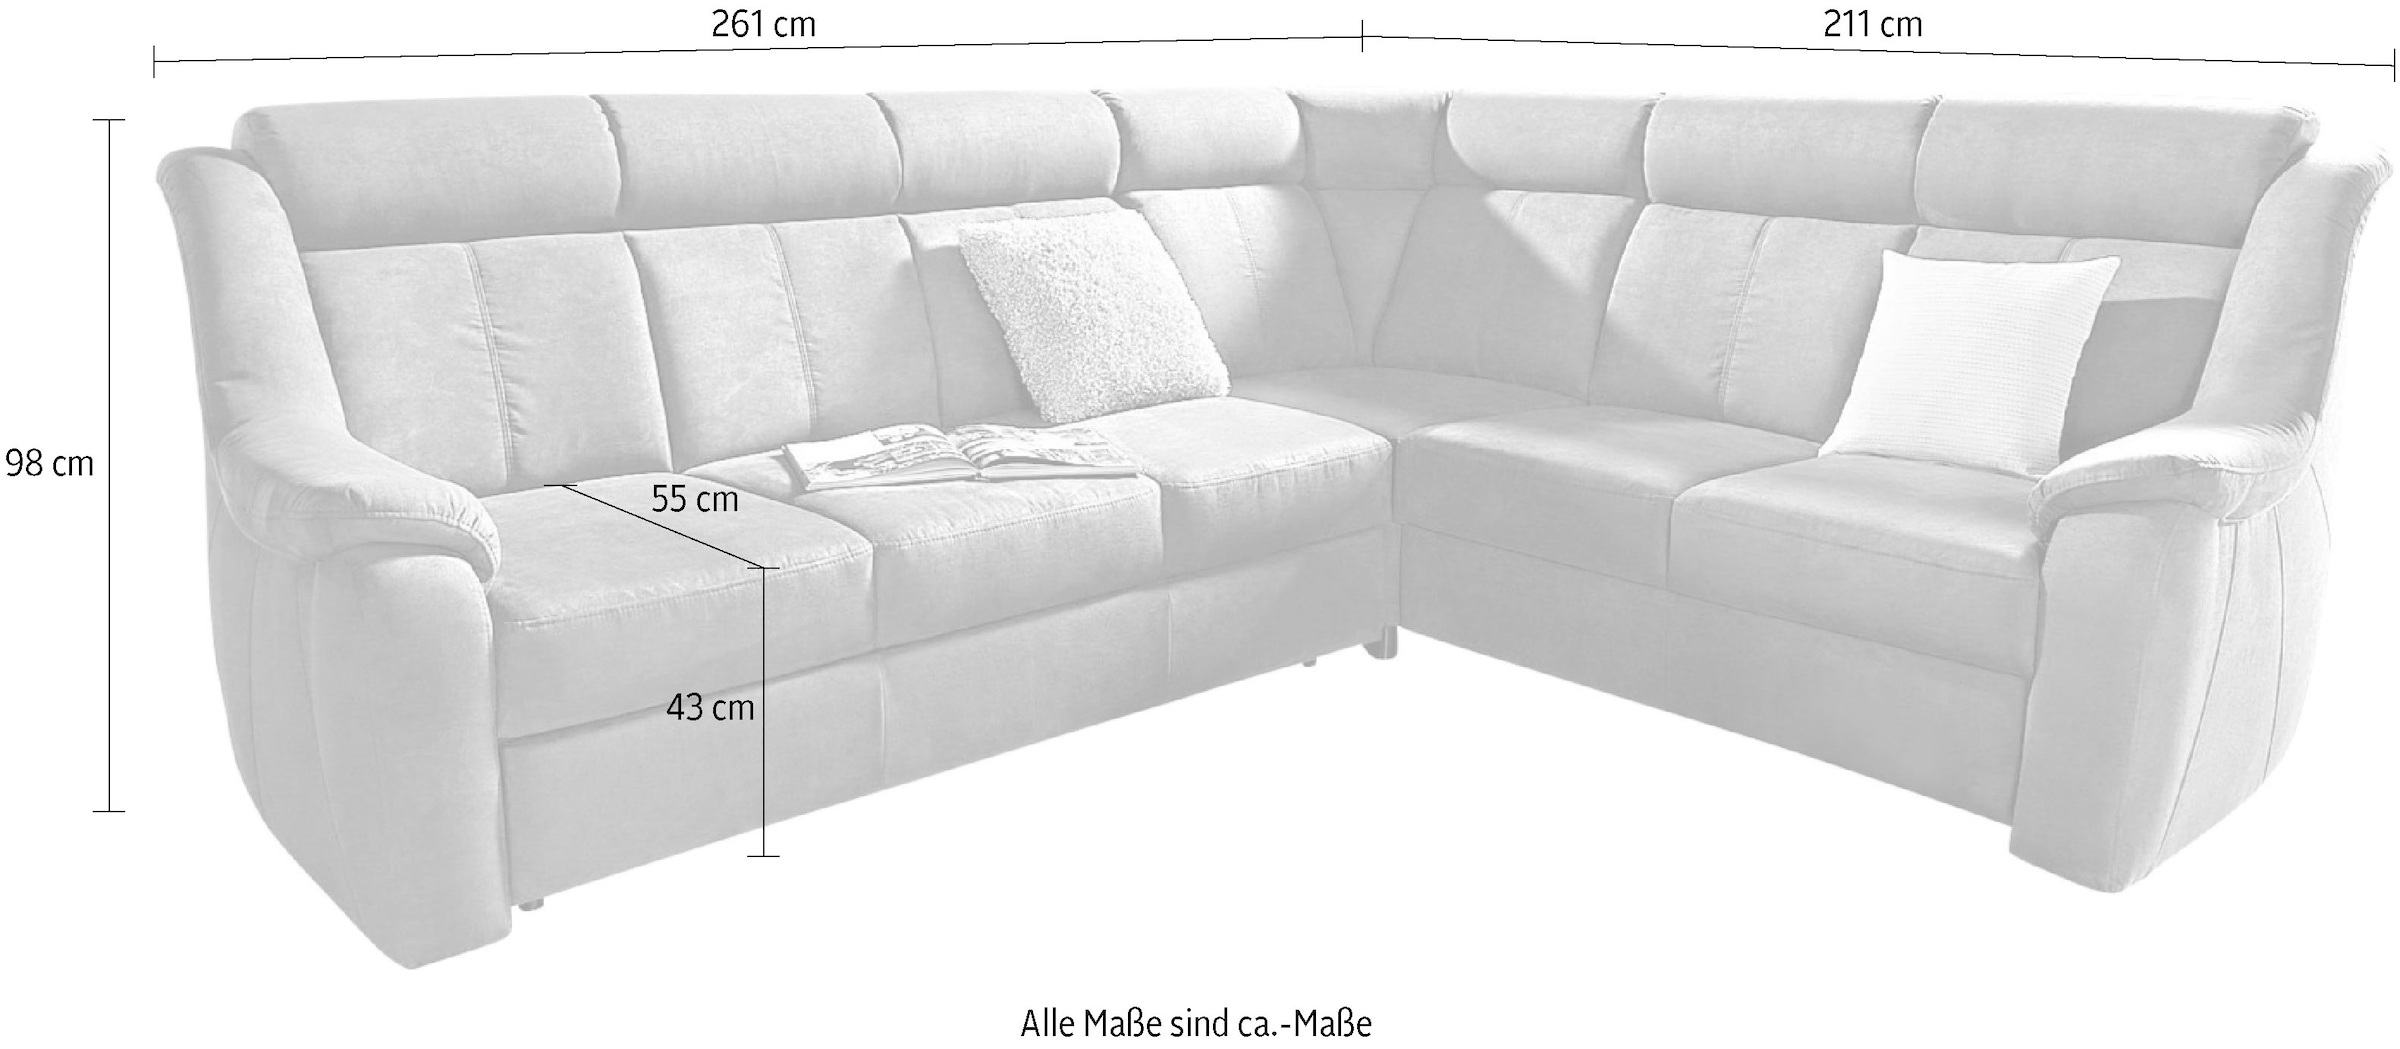 sit&more Ecksofa »Basel L-Form«, wahlweise mit Relaxfunktion